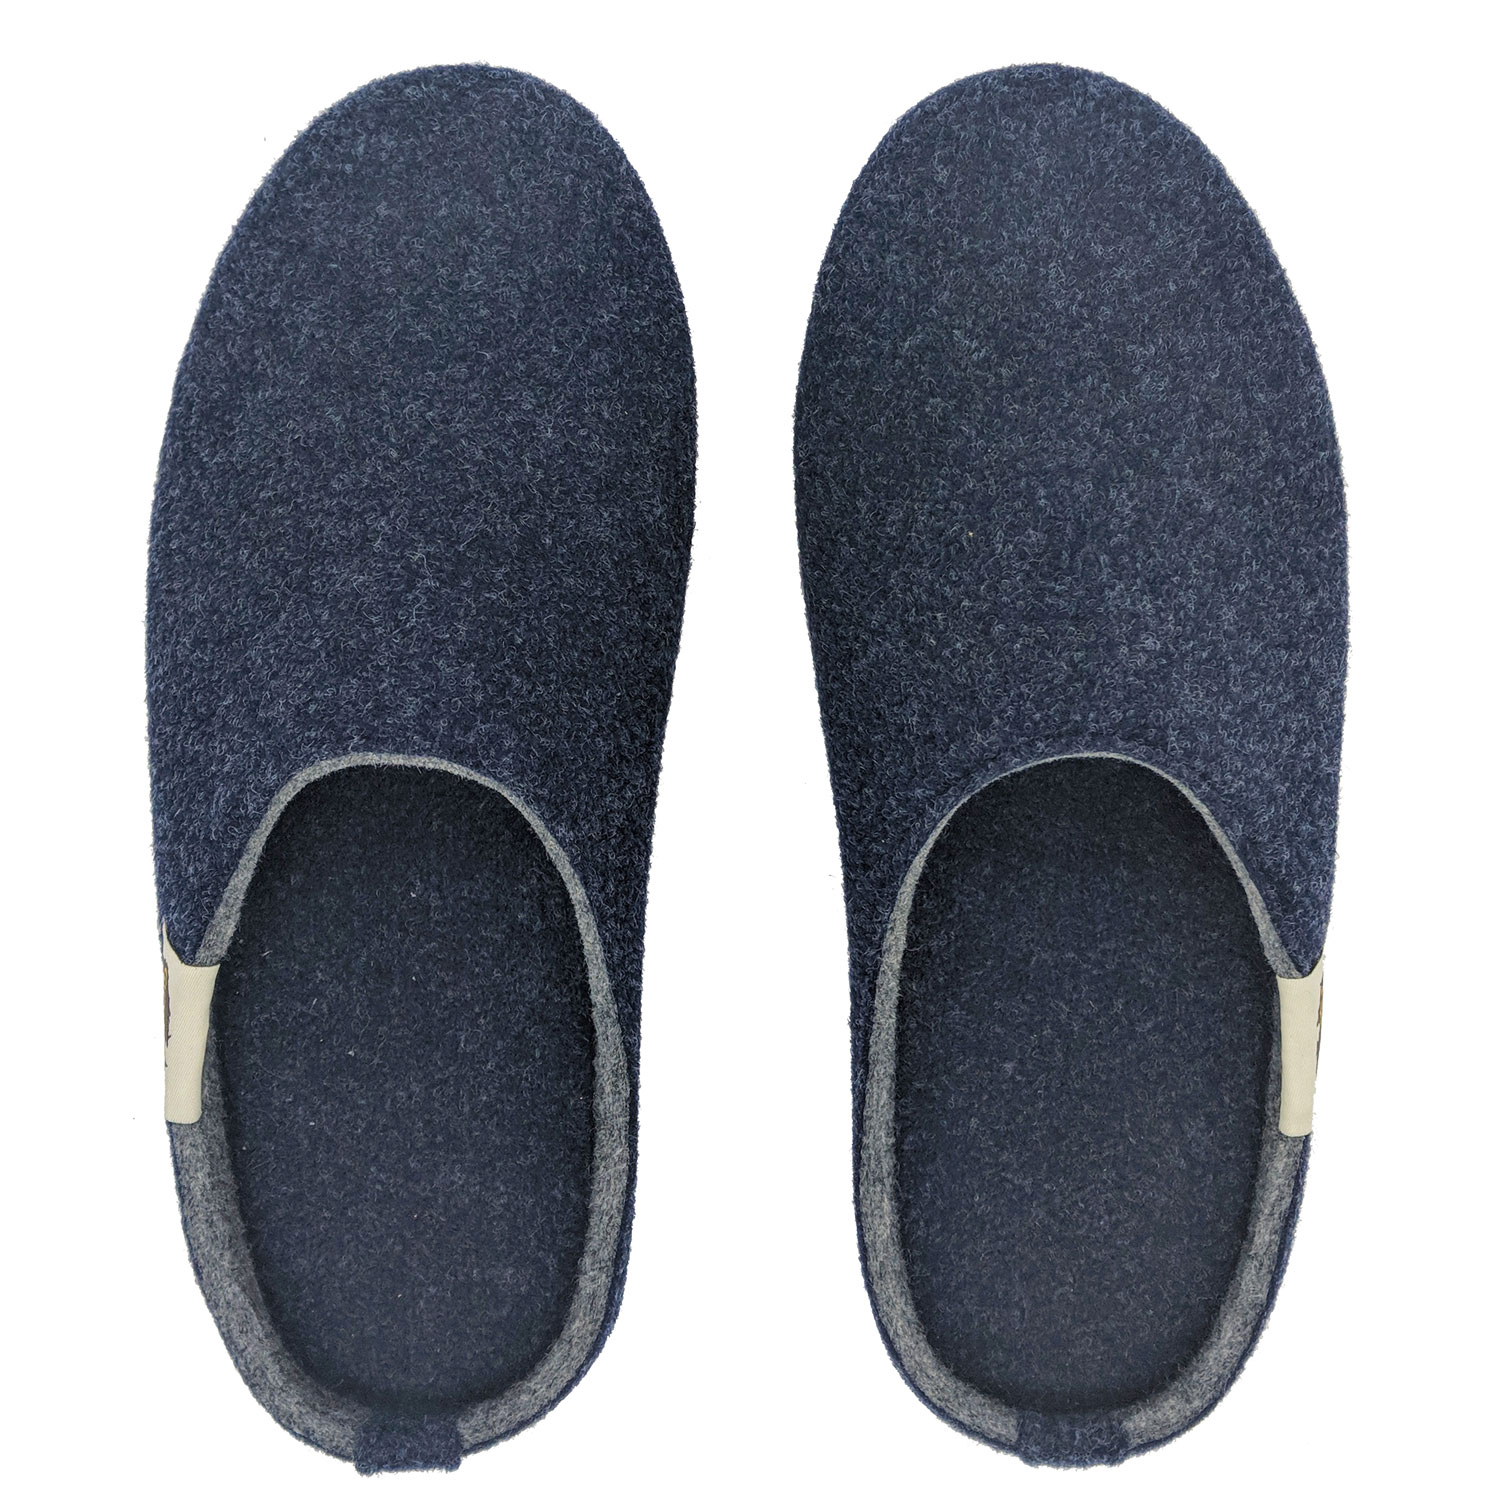 GUMBIES – Outback Slipper, Navy Grey 